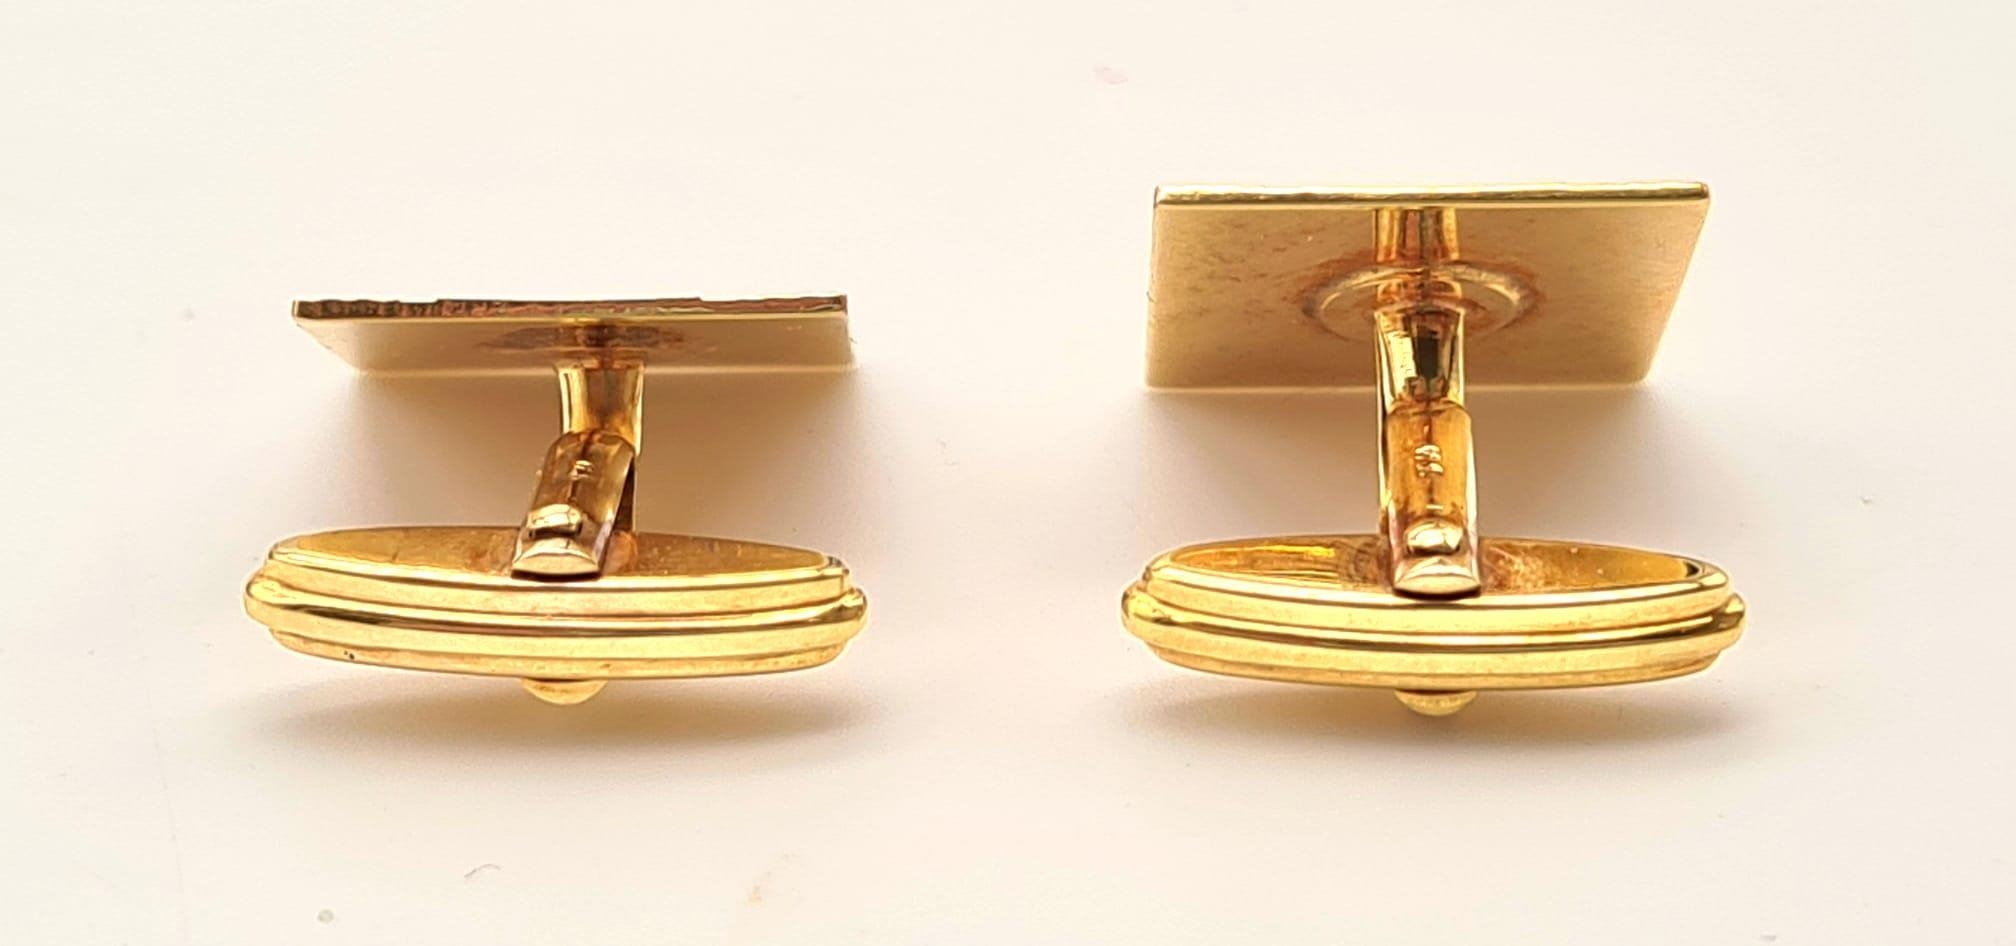 A Pair of Vintage 9K Yellow Gold Flat-Square Cufflinks - these are making a comeback! 7.06g total - Image 4 of 7